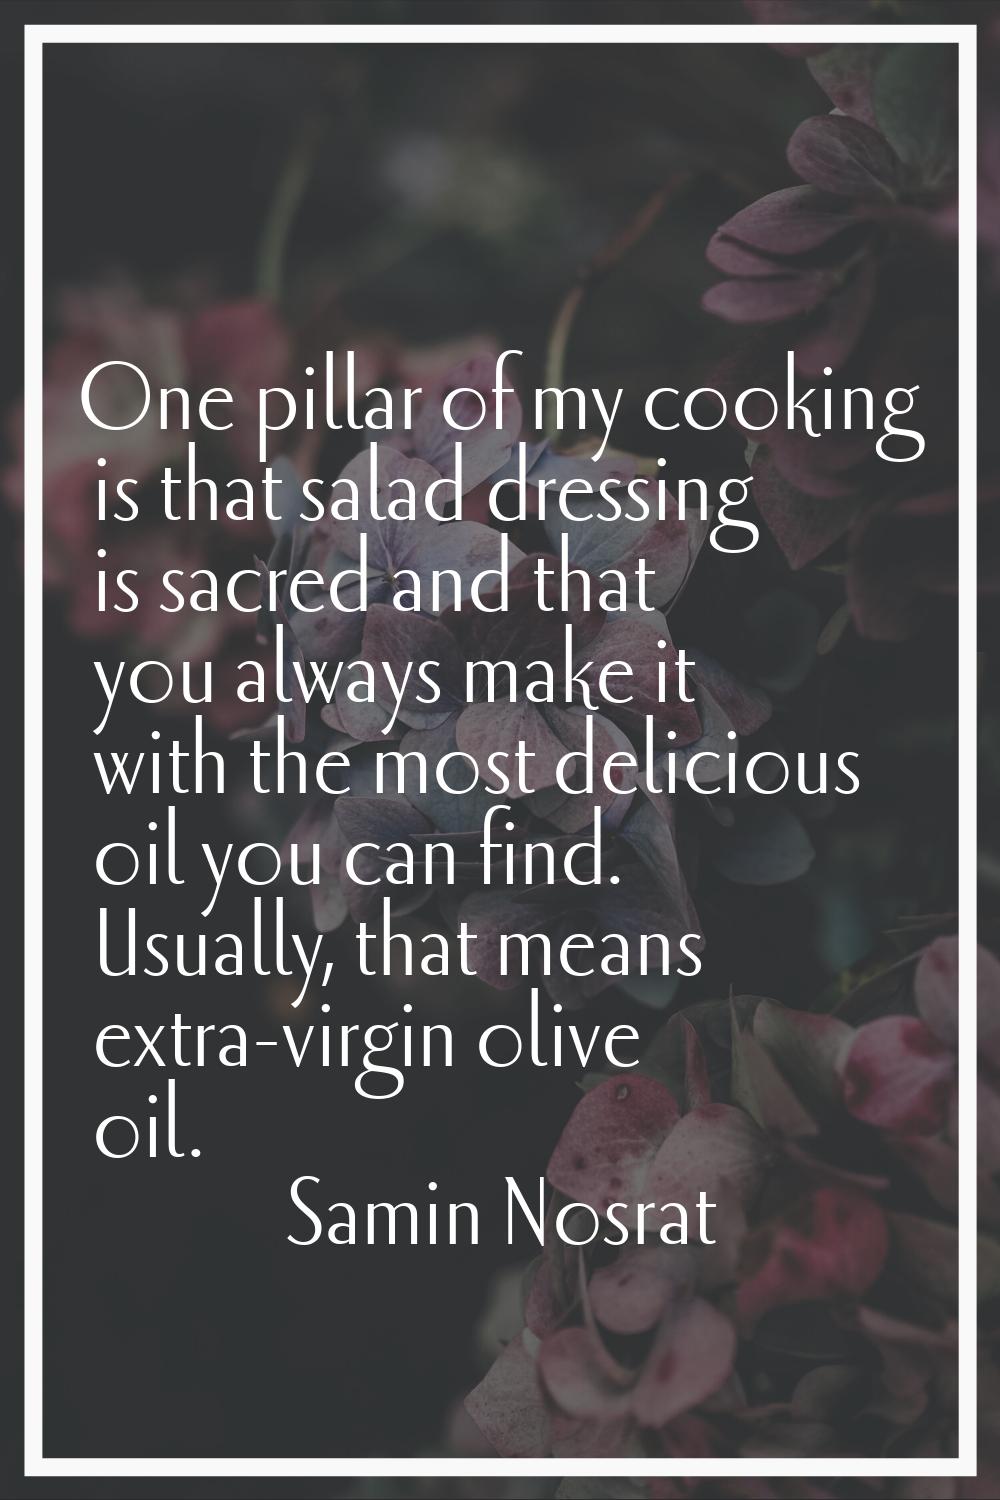 One pillar of my cooking is that salad dressing is sacred and that you always make it with the most